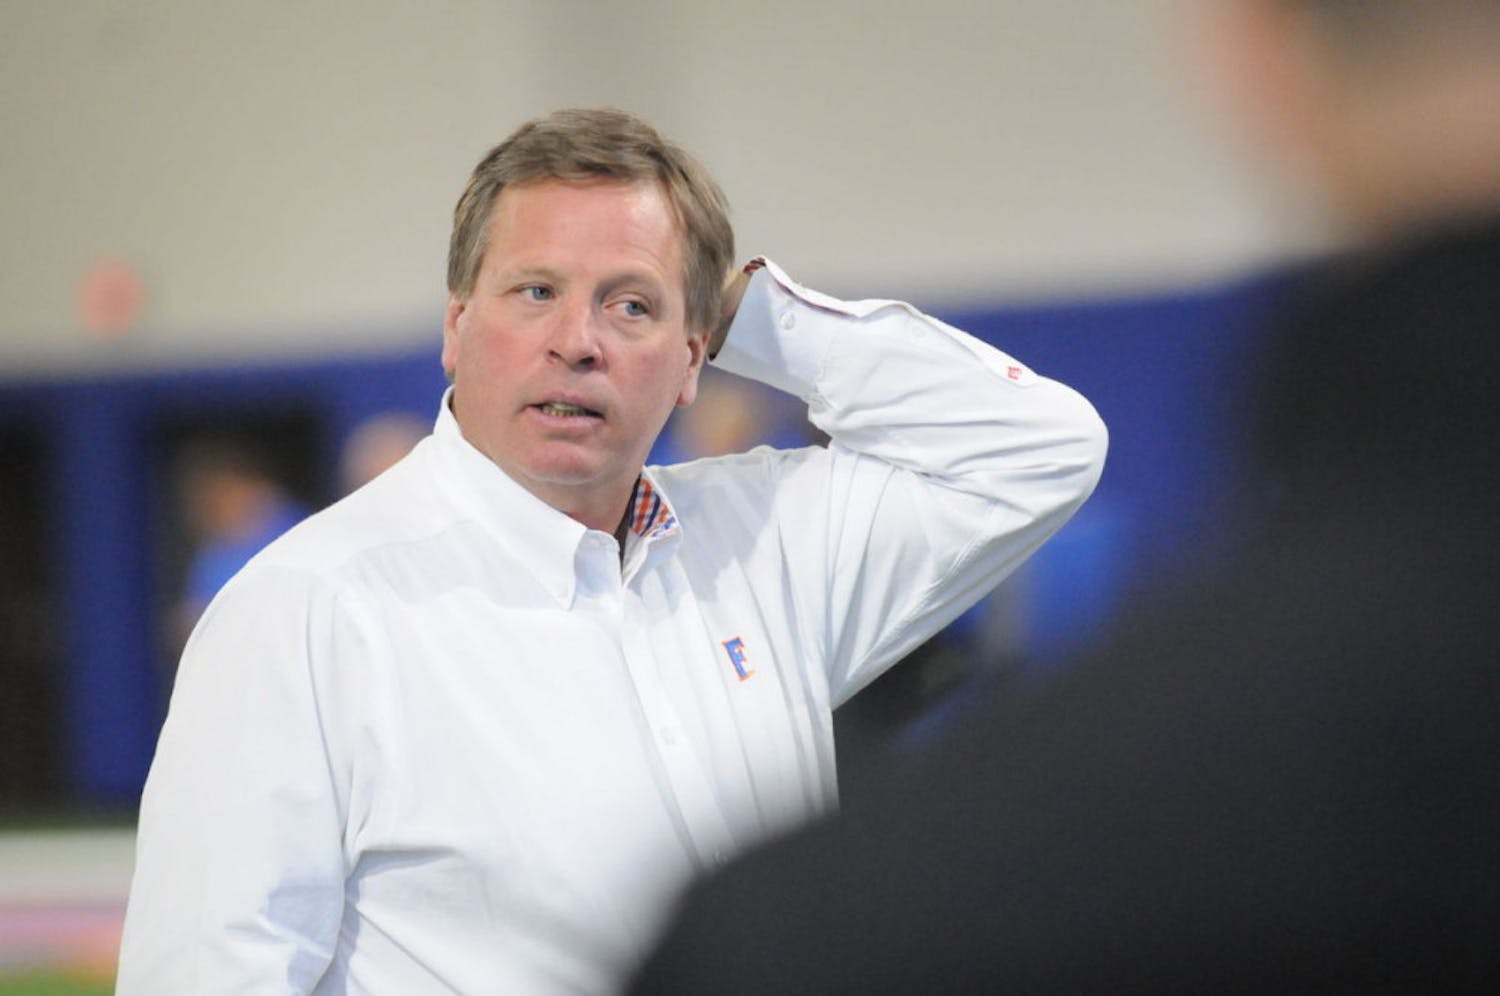 When Gators coach Jim McElwain was asked if he'd considered forcing players to wear helmets on scooters or ban athletes from riding on scooters all together, he answered, "Well, we live in America."